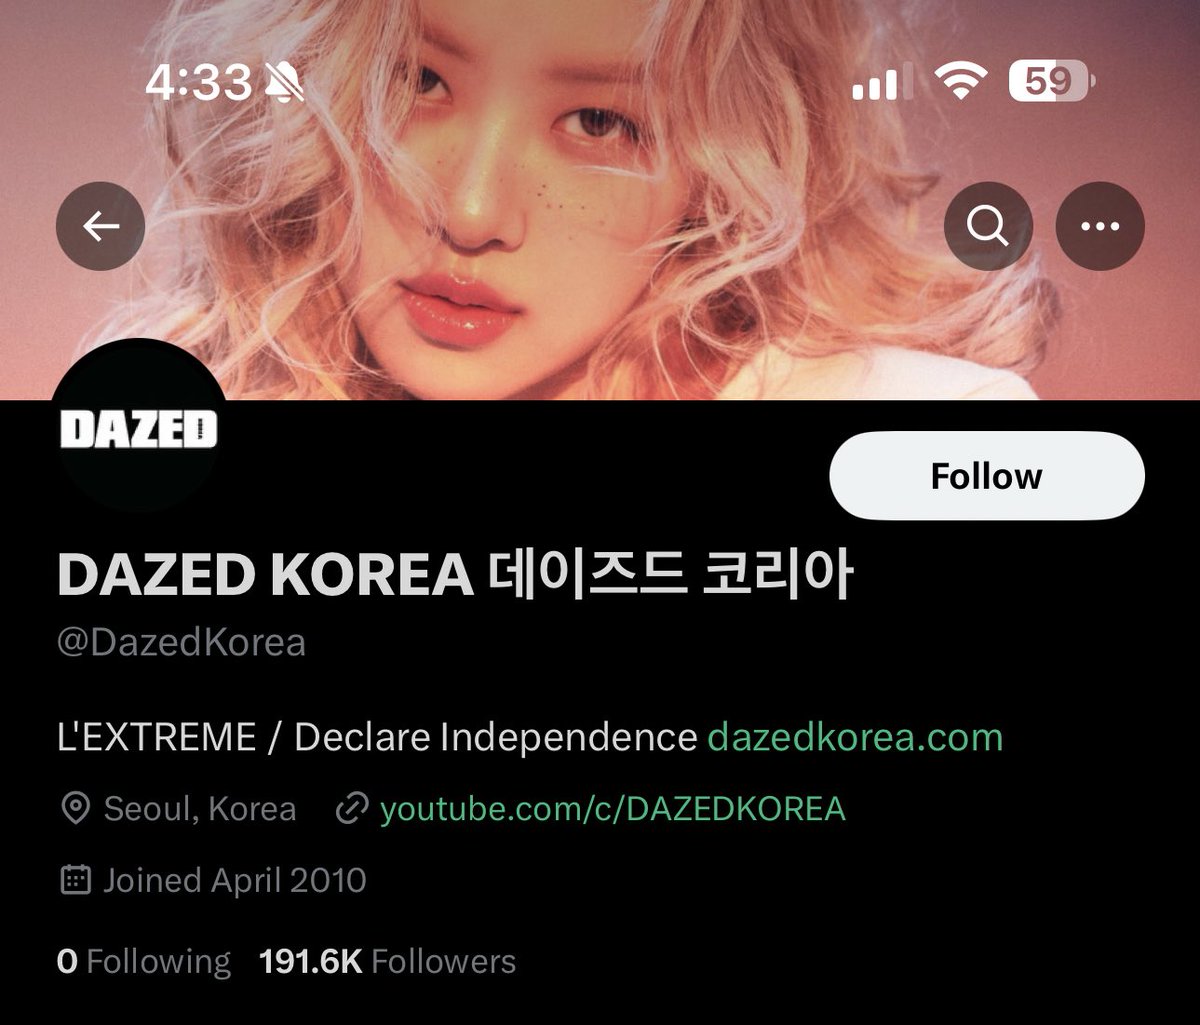 oh @dazedkorea you ate this one thing!